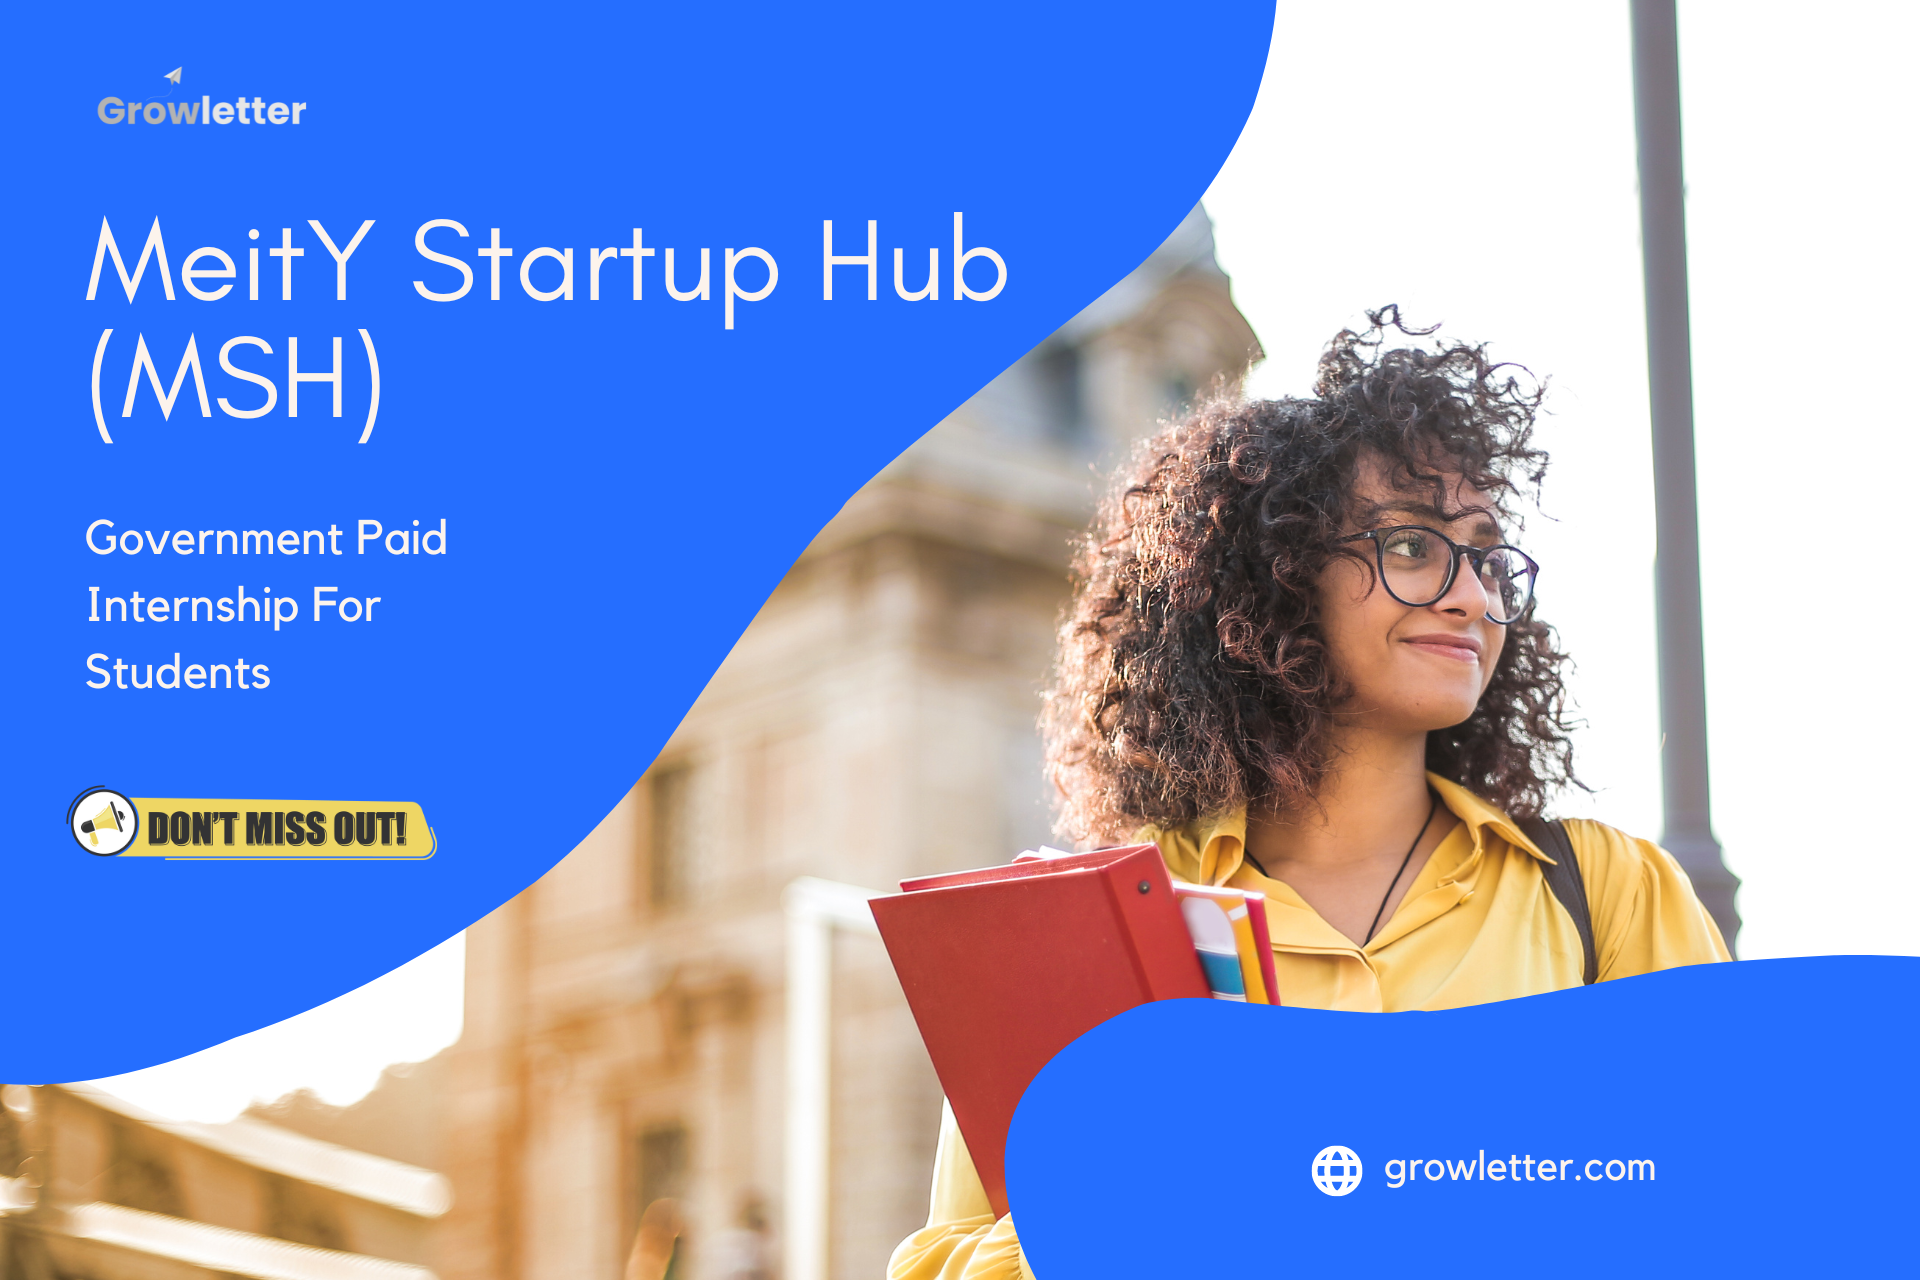 Government Paid Internship For Students In MeitY Startup Hub (MSH)